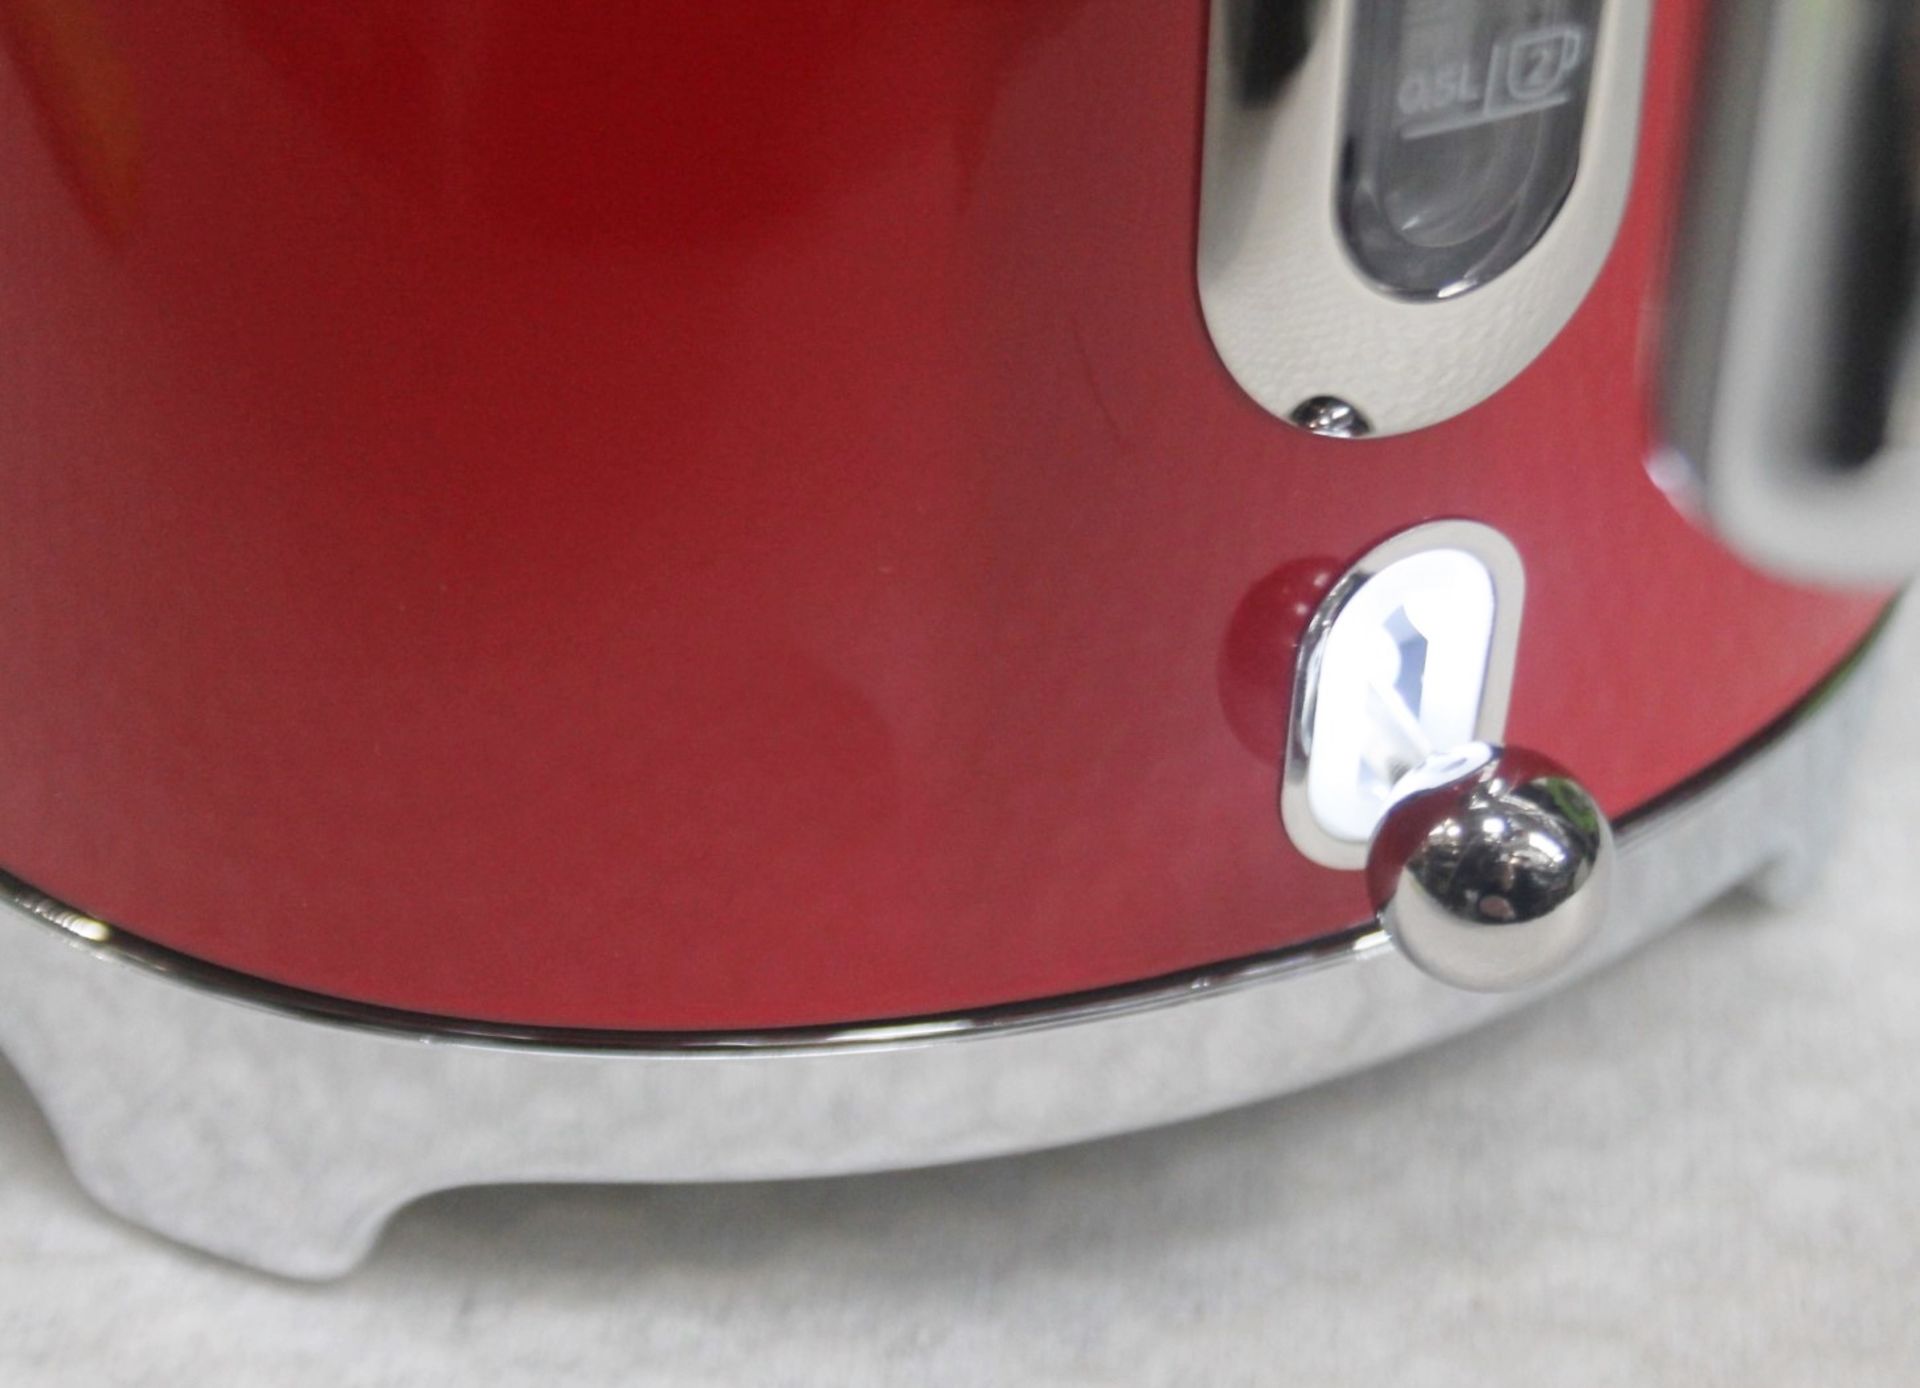 1 x SMEG 'Retro' Kettle In Matte Red Stainless Steel - RRP £159.00 - Image 3 of 13